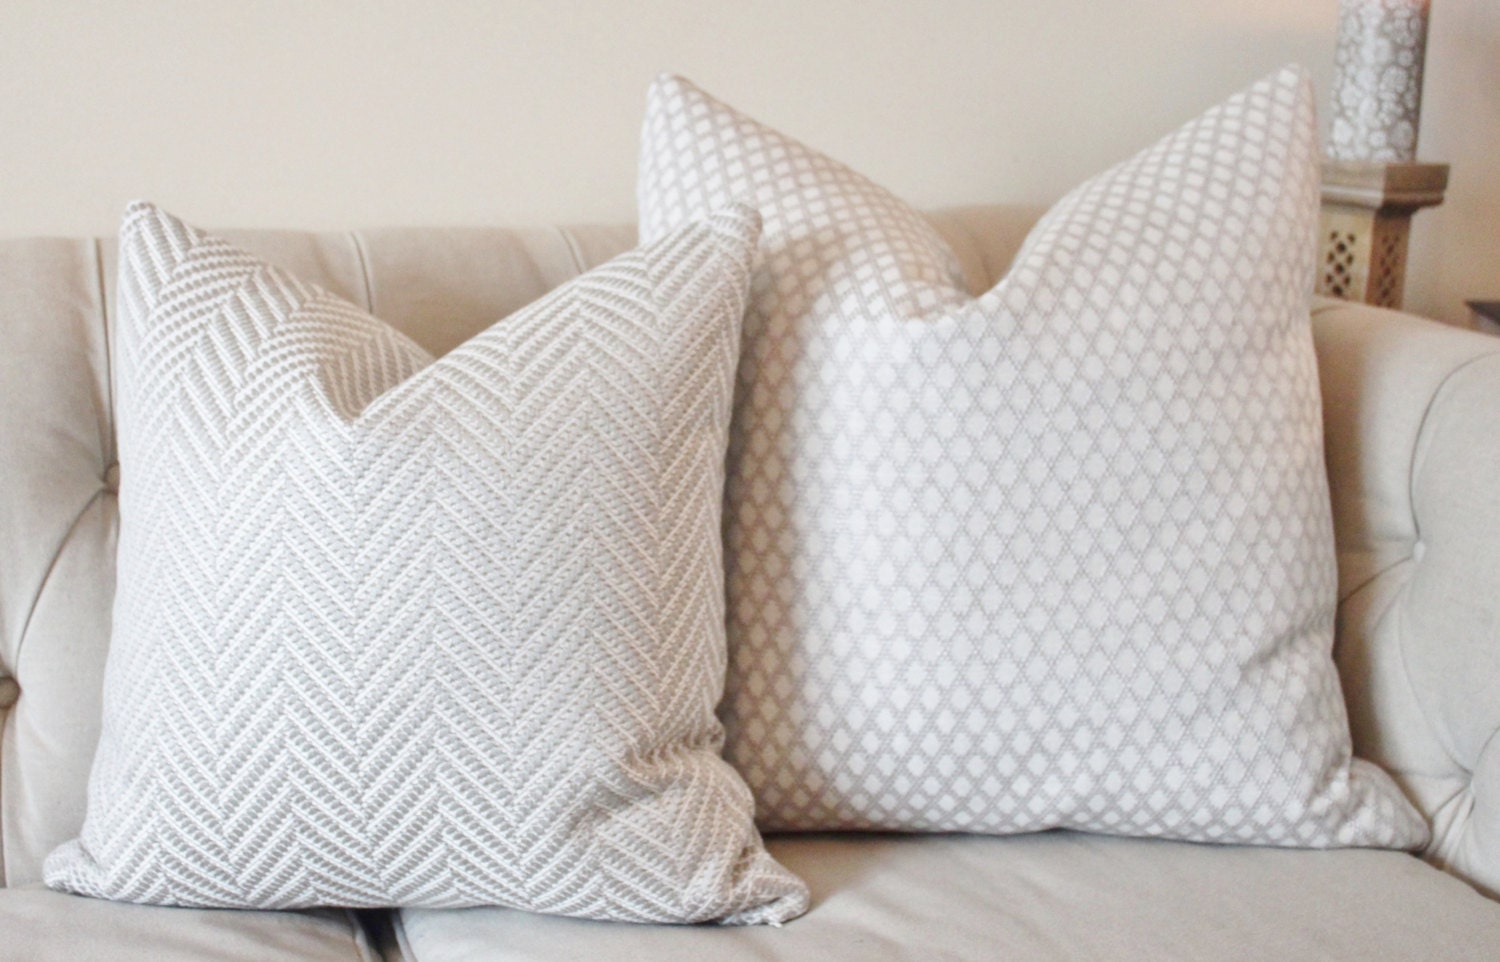 Light Gray and White Pillow Silver Grey Woven Geometric 